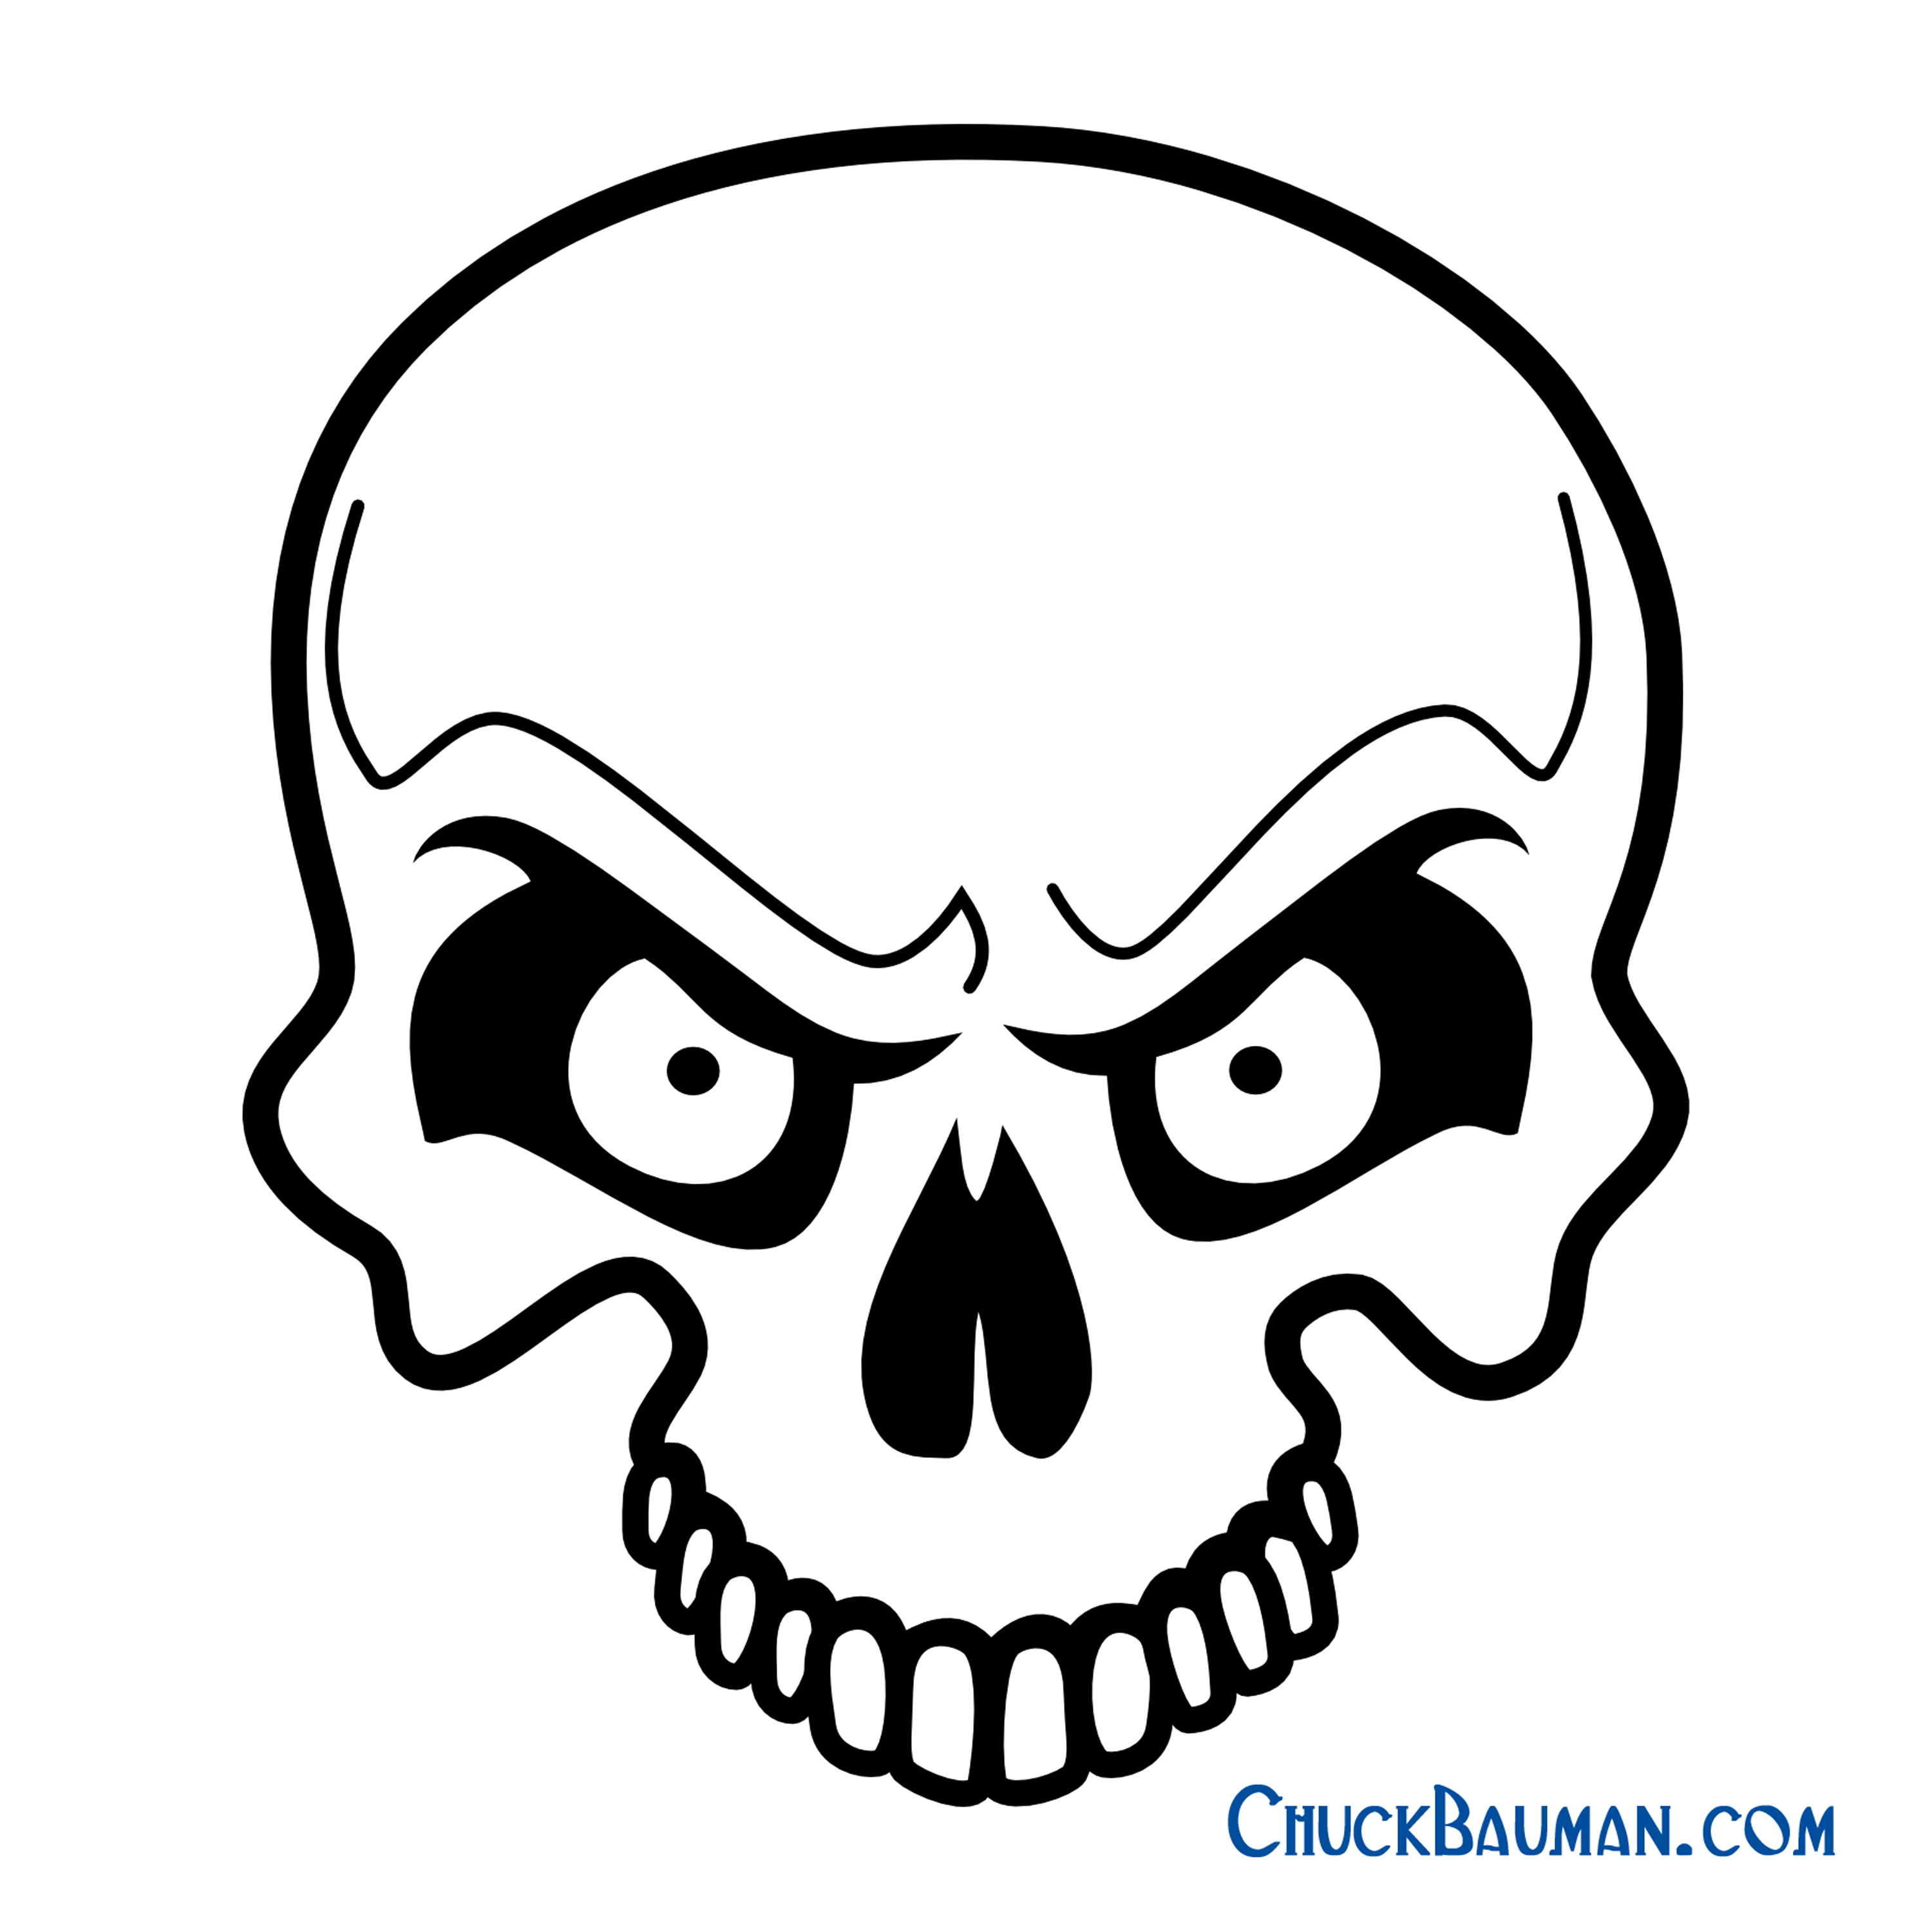 free-printable-airbrush-skull-stencils-printable-form-templates-and